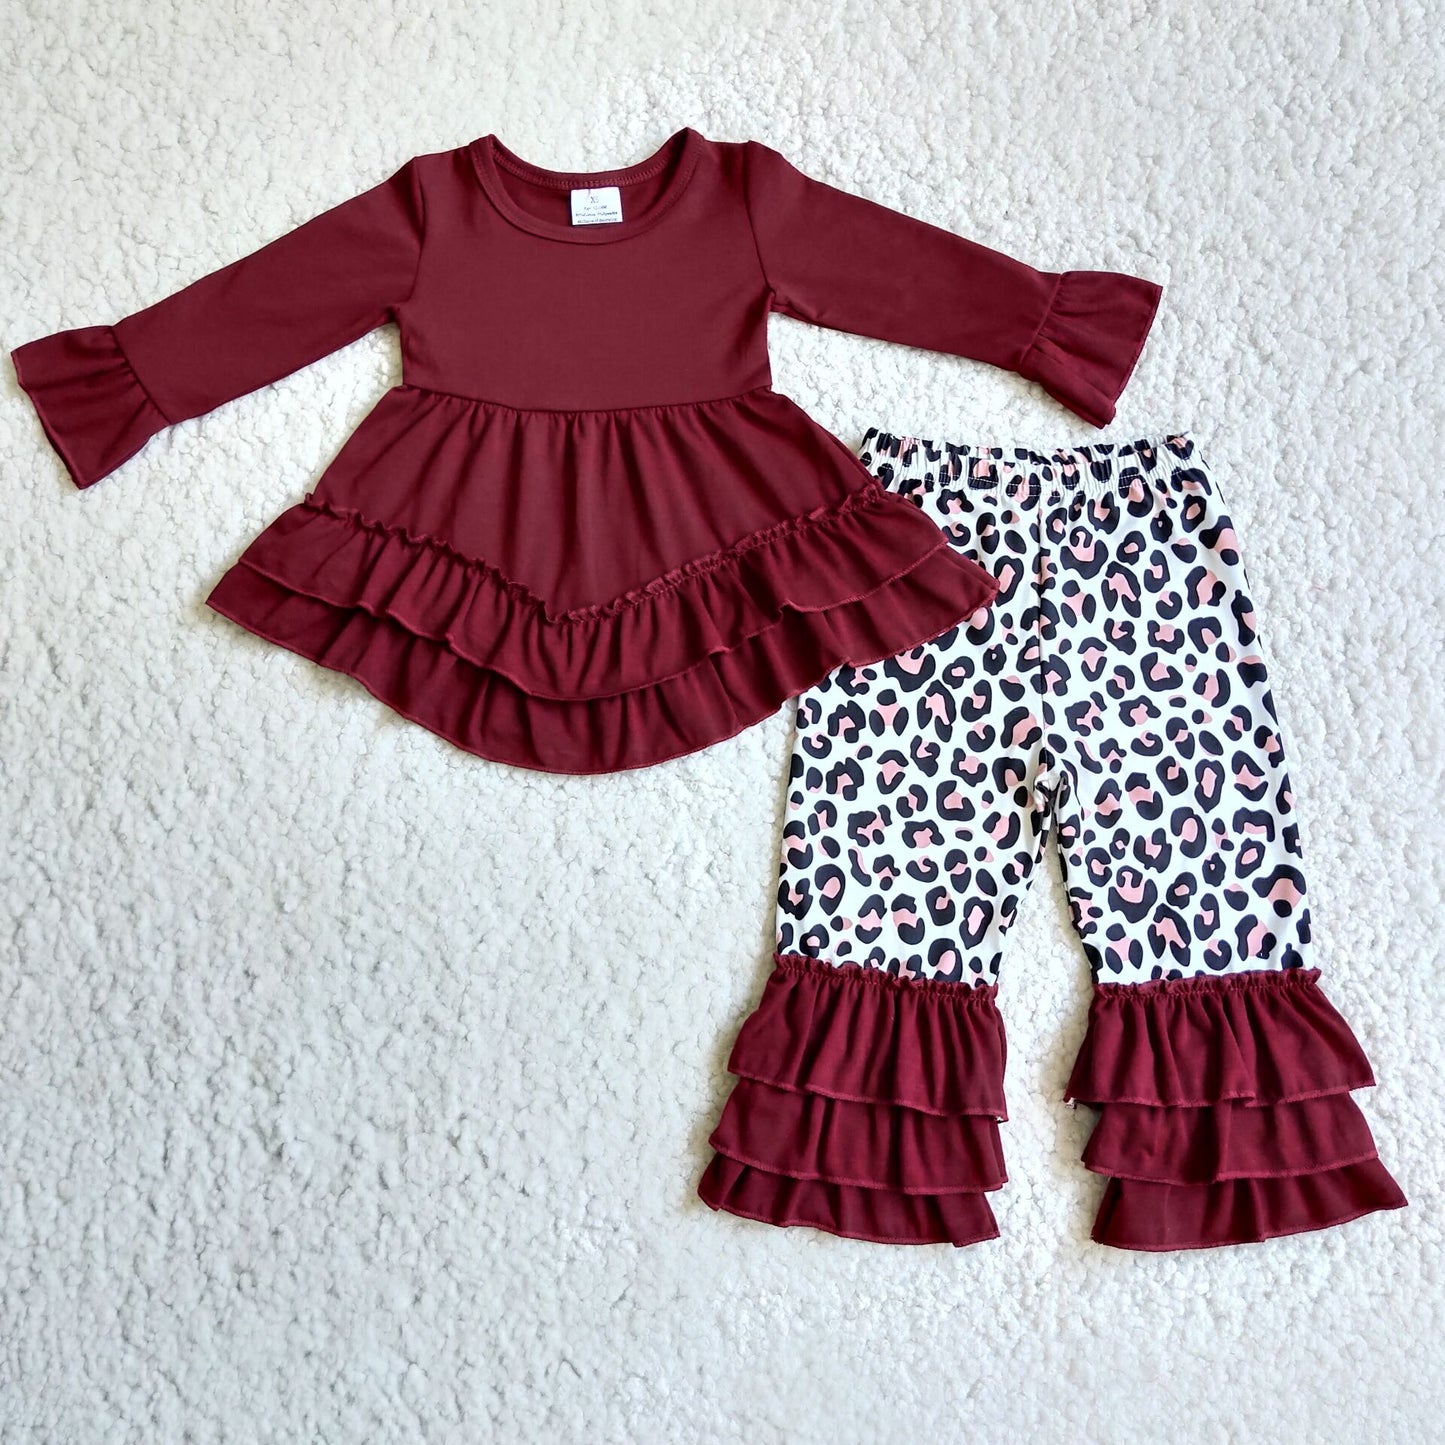 baby girls solid maroon cotton tunic top leopard pants 2pc outfit